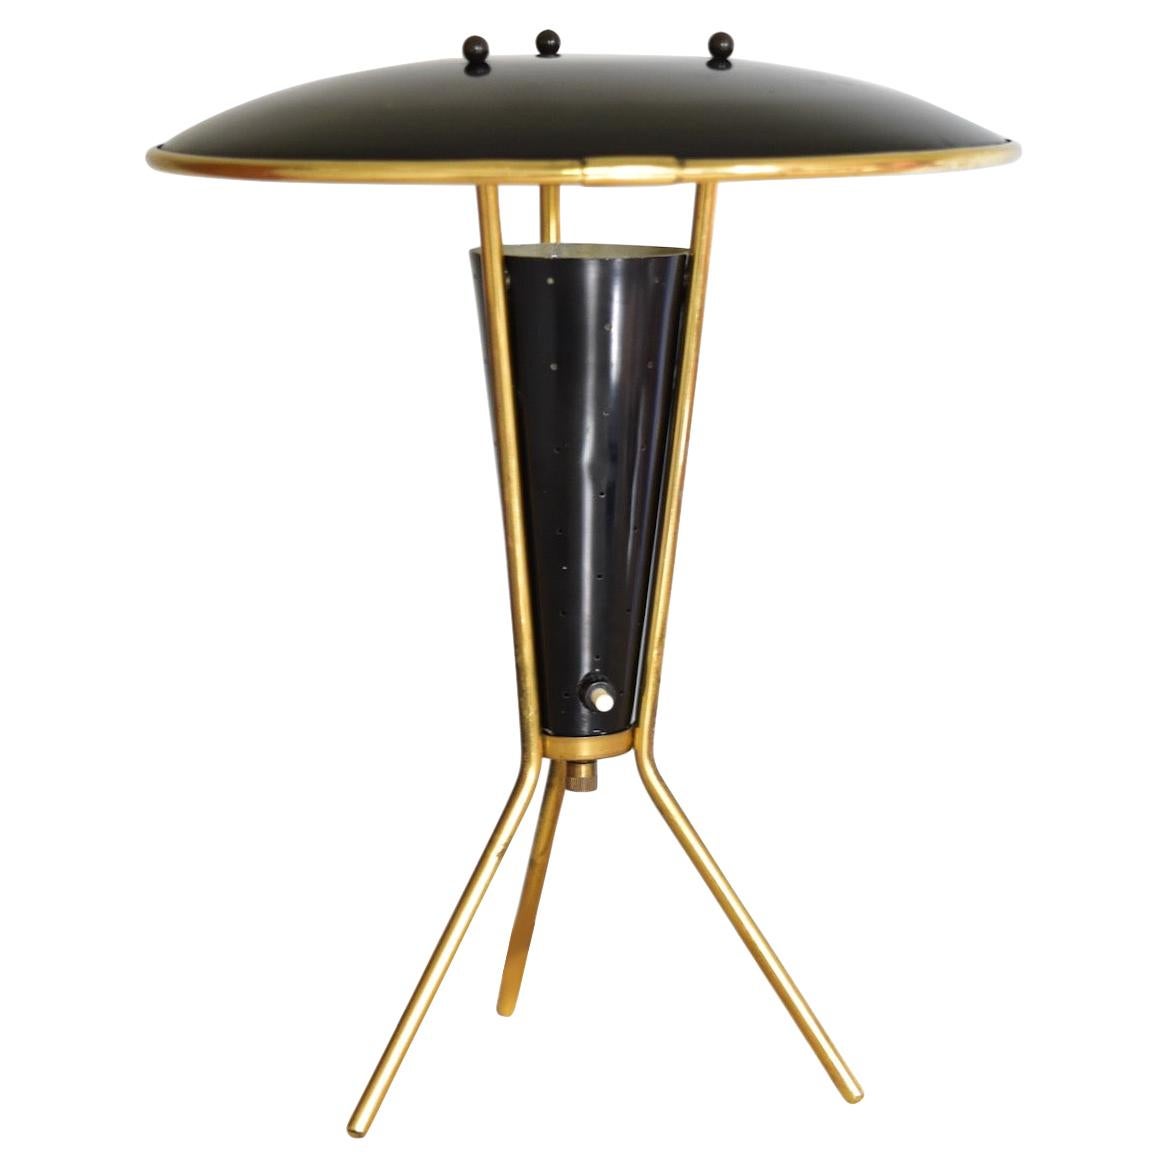 German Brass Atomic Tripod Table Lamp 1960's with Perforated Shade